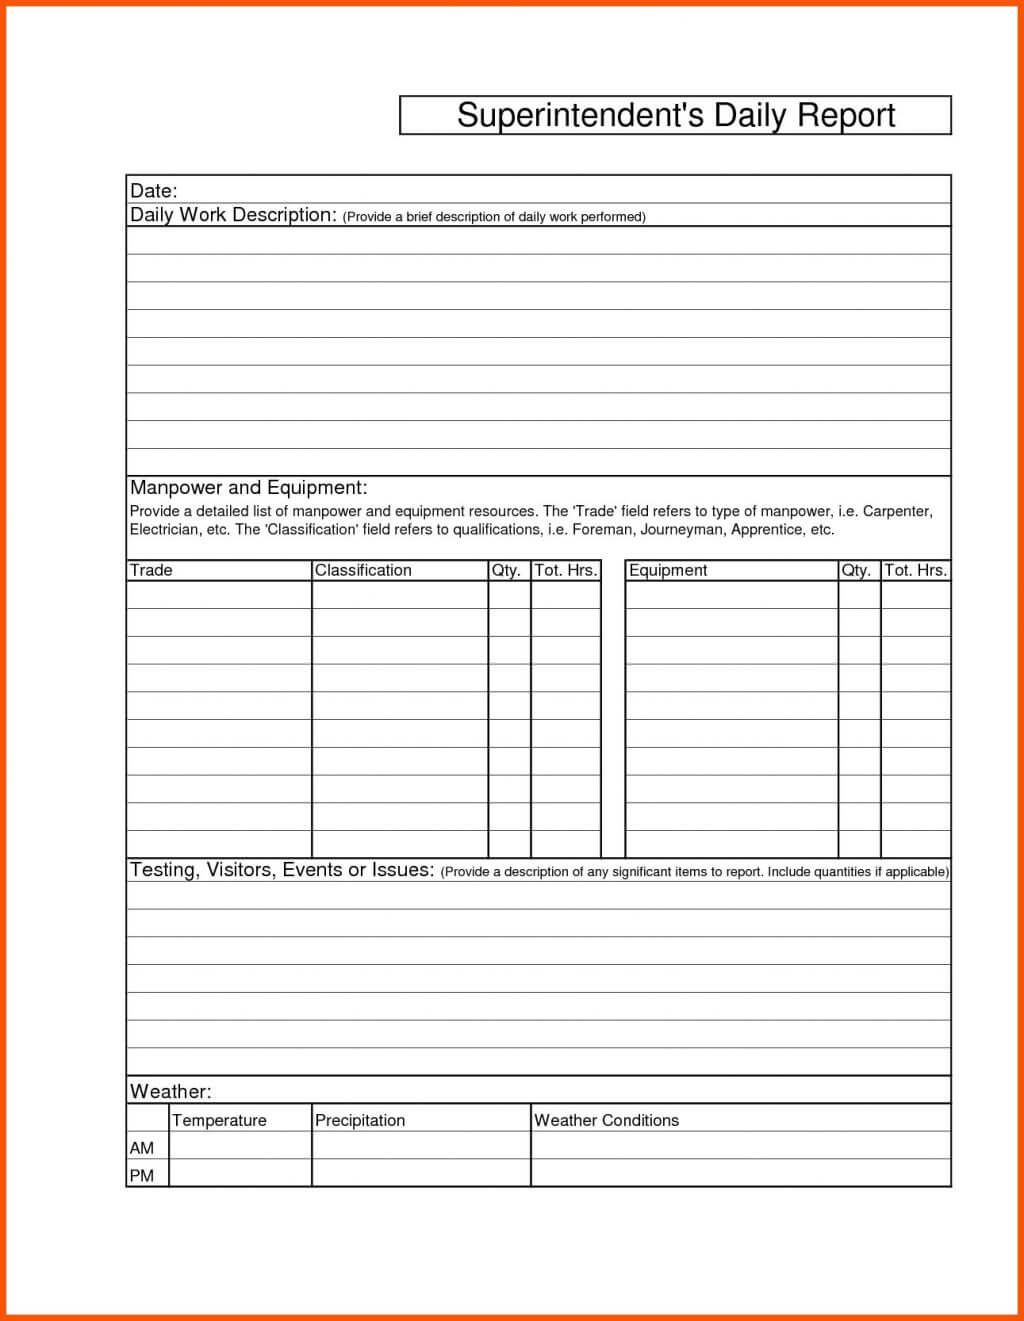 012 Daily Work Report Mail Format For Employees Manpower Within Employee Daily Report Template